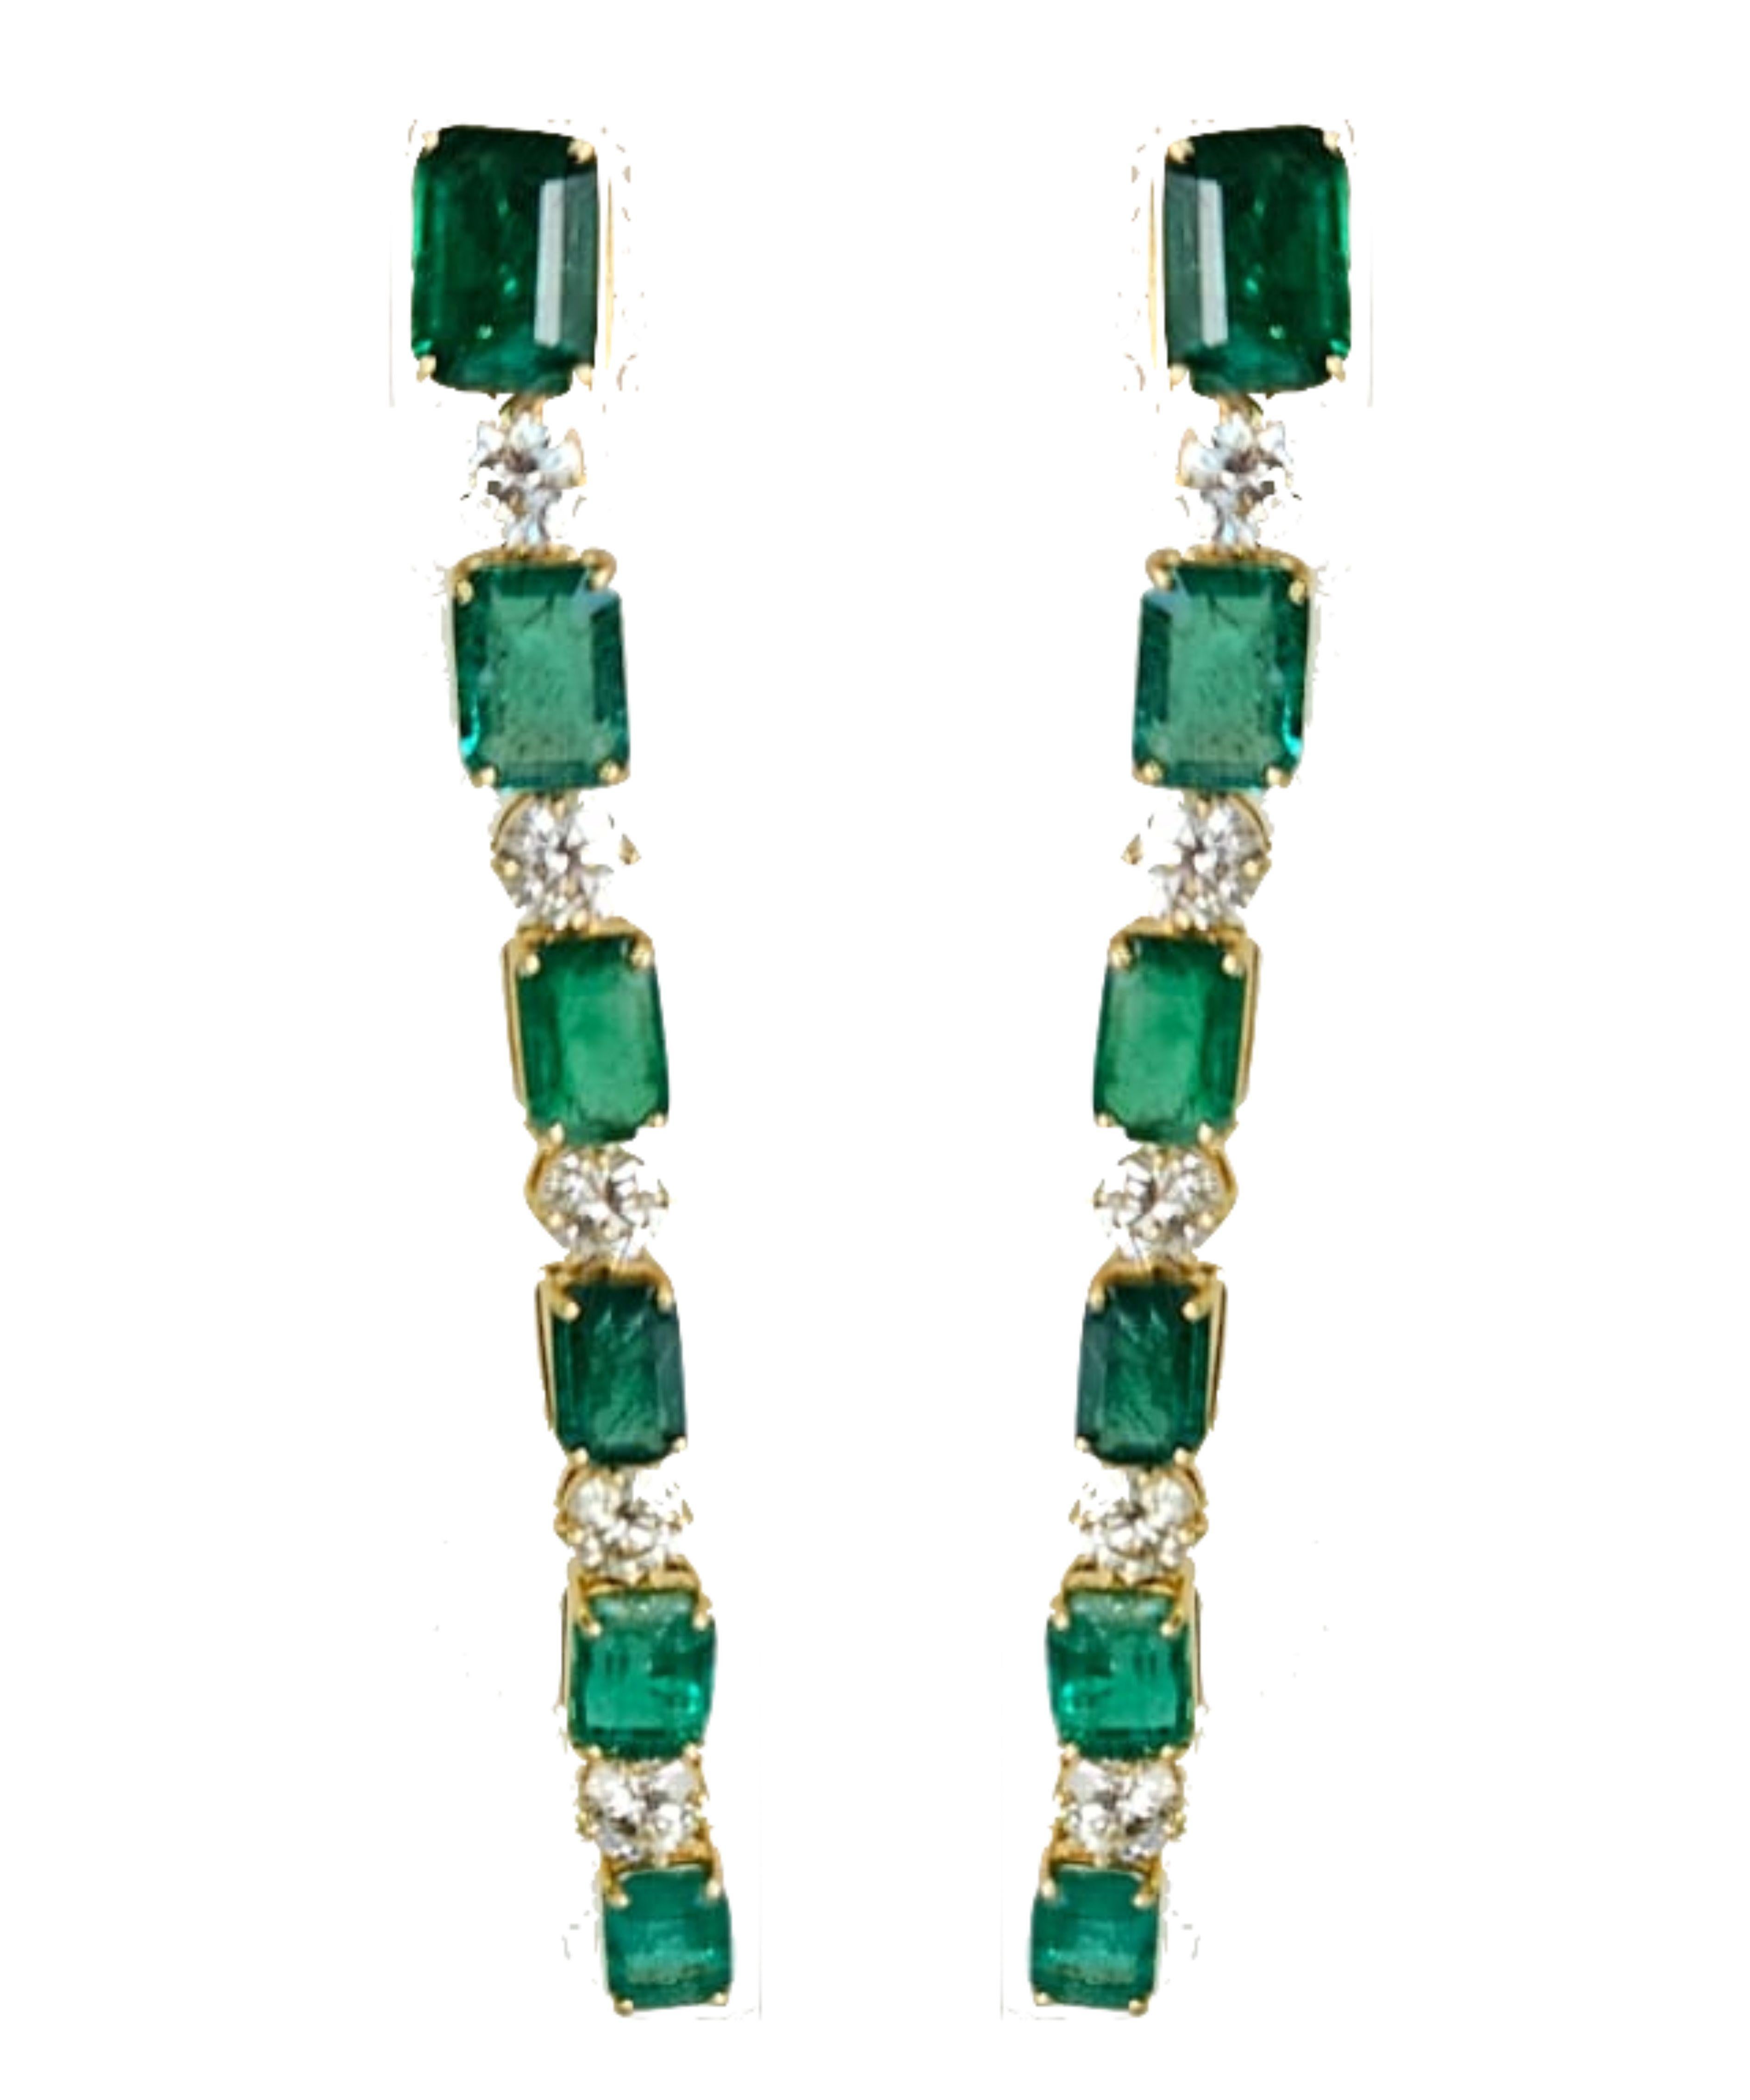 A very gorgeous and beautiful, modern style, Emerald Chandelier Earrings set in 18K Yellow Gold & Diamonds. The weight of the Emeralds is 10.22 carats. The Emeralds are completely natural, without any treatment and are of Zambian origin. The